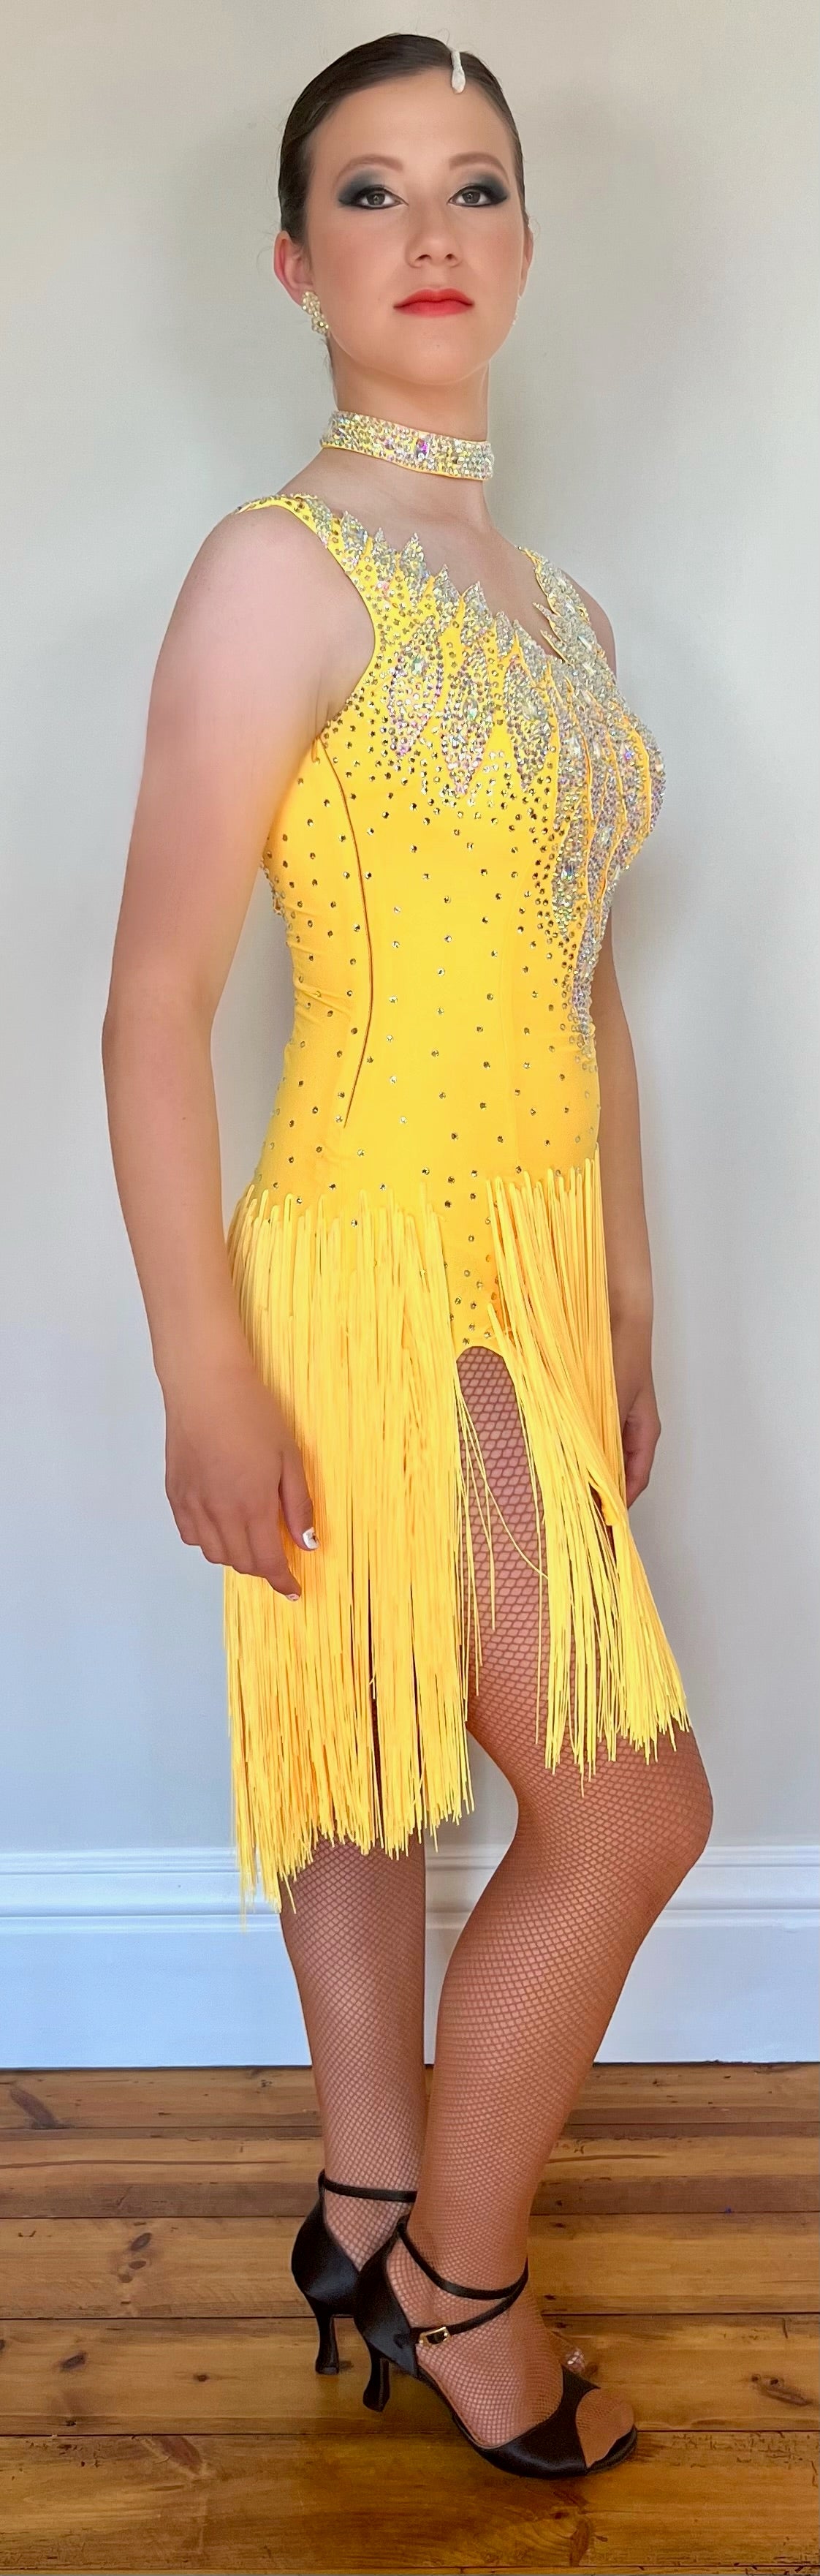 110 Yellow Leaf design Fringe skirt Latin Dress. Open back with leaf detail, necklace with hanging detail.